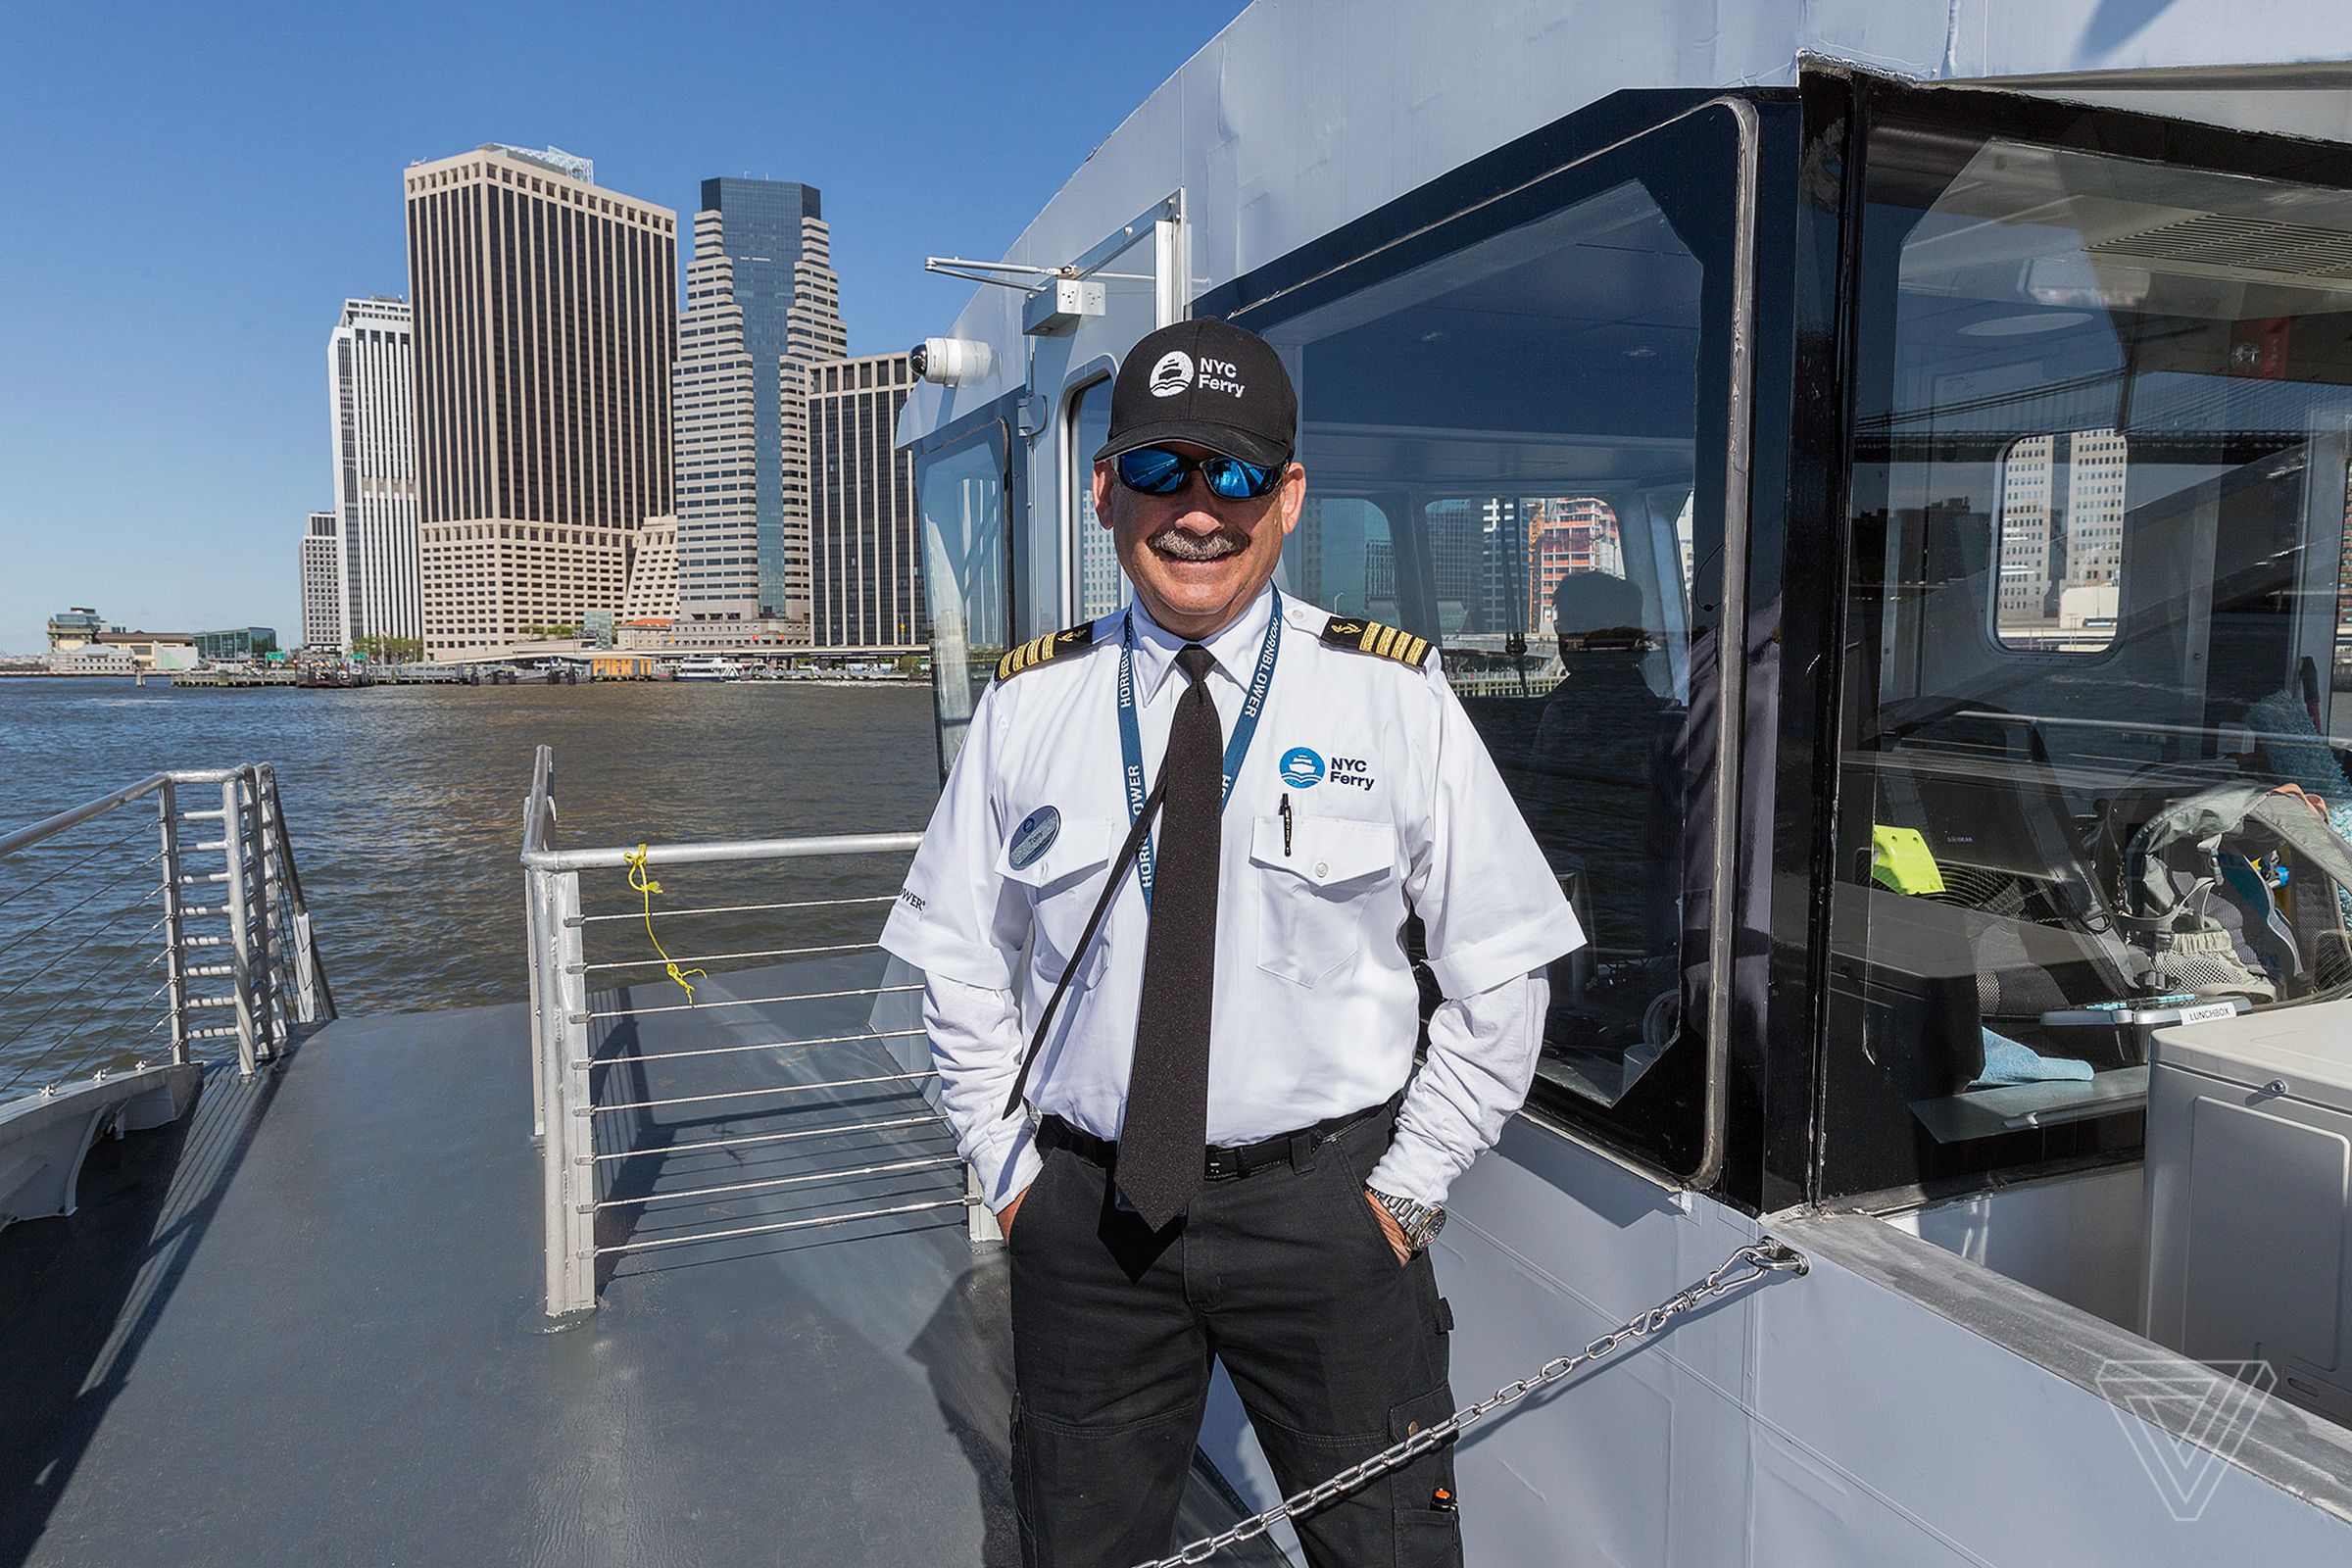 Tony Sanchez, fresh from the simulator, on board one of New York’s newest ferry boats. All aboard.